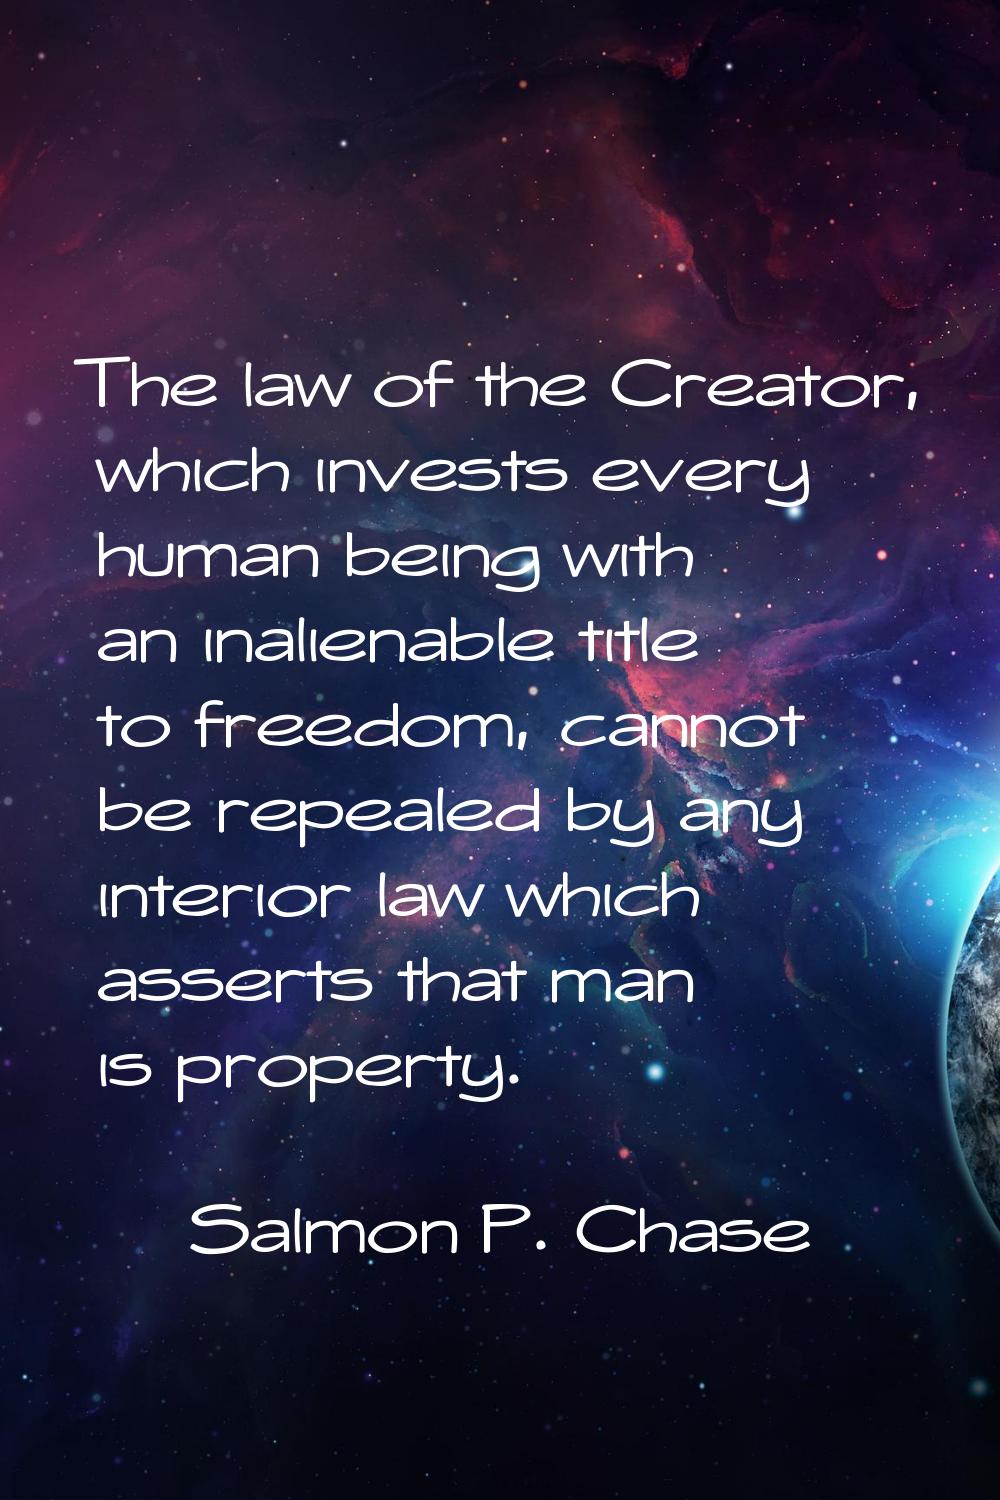 The law of the Creator, which invests every human being with an inalienable title to freedom, canno